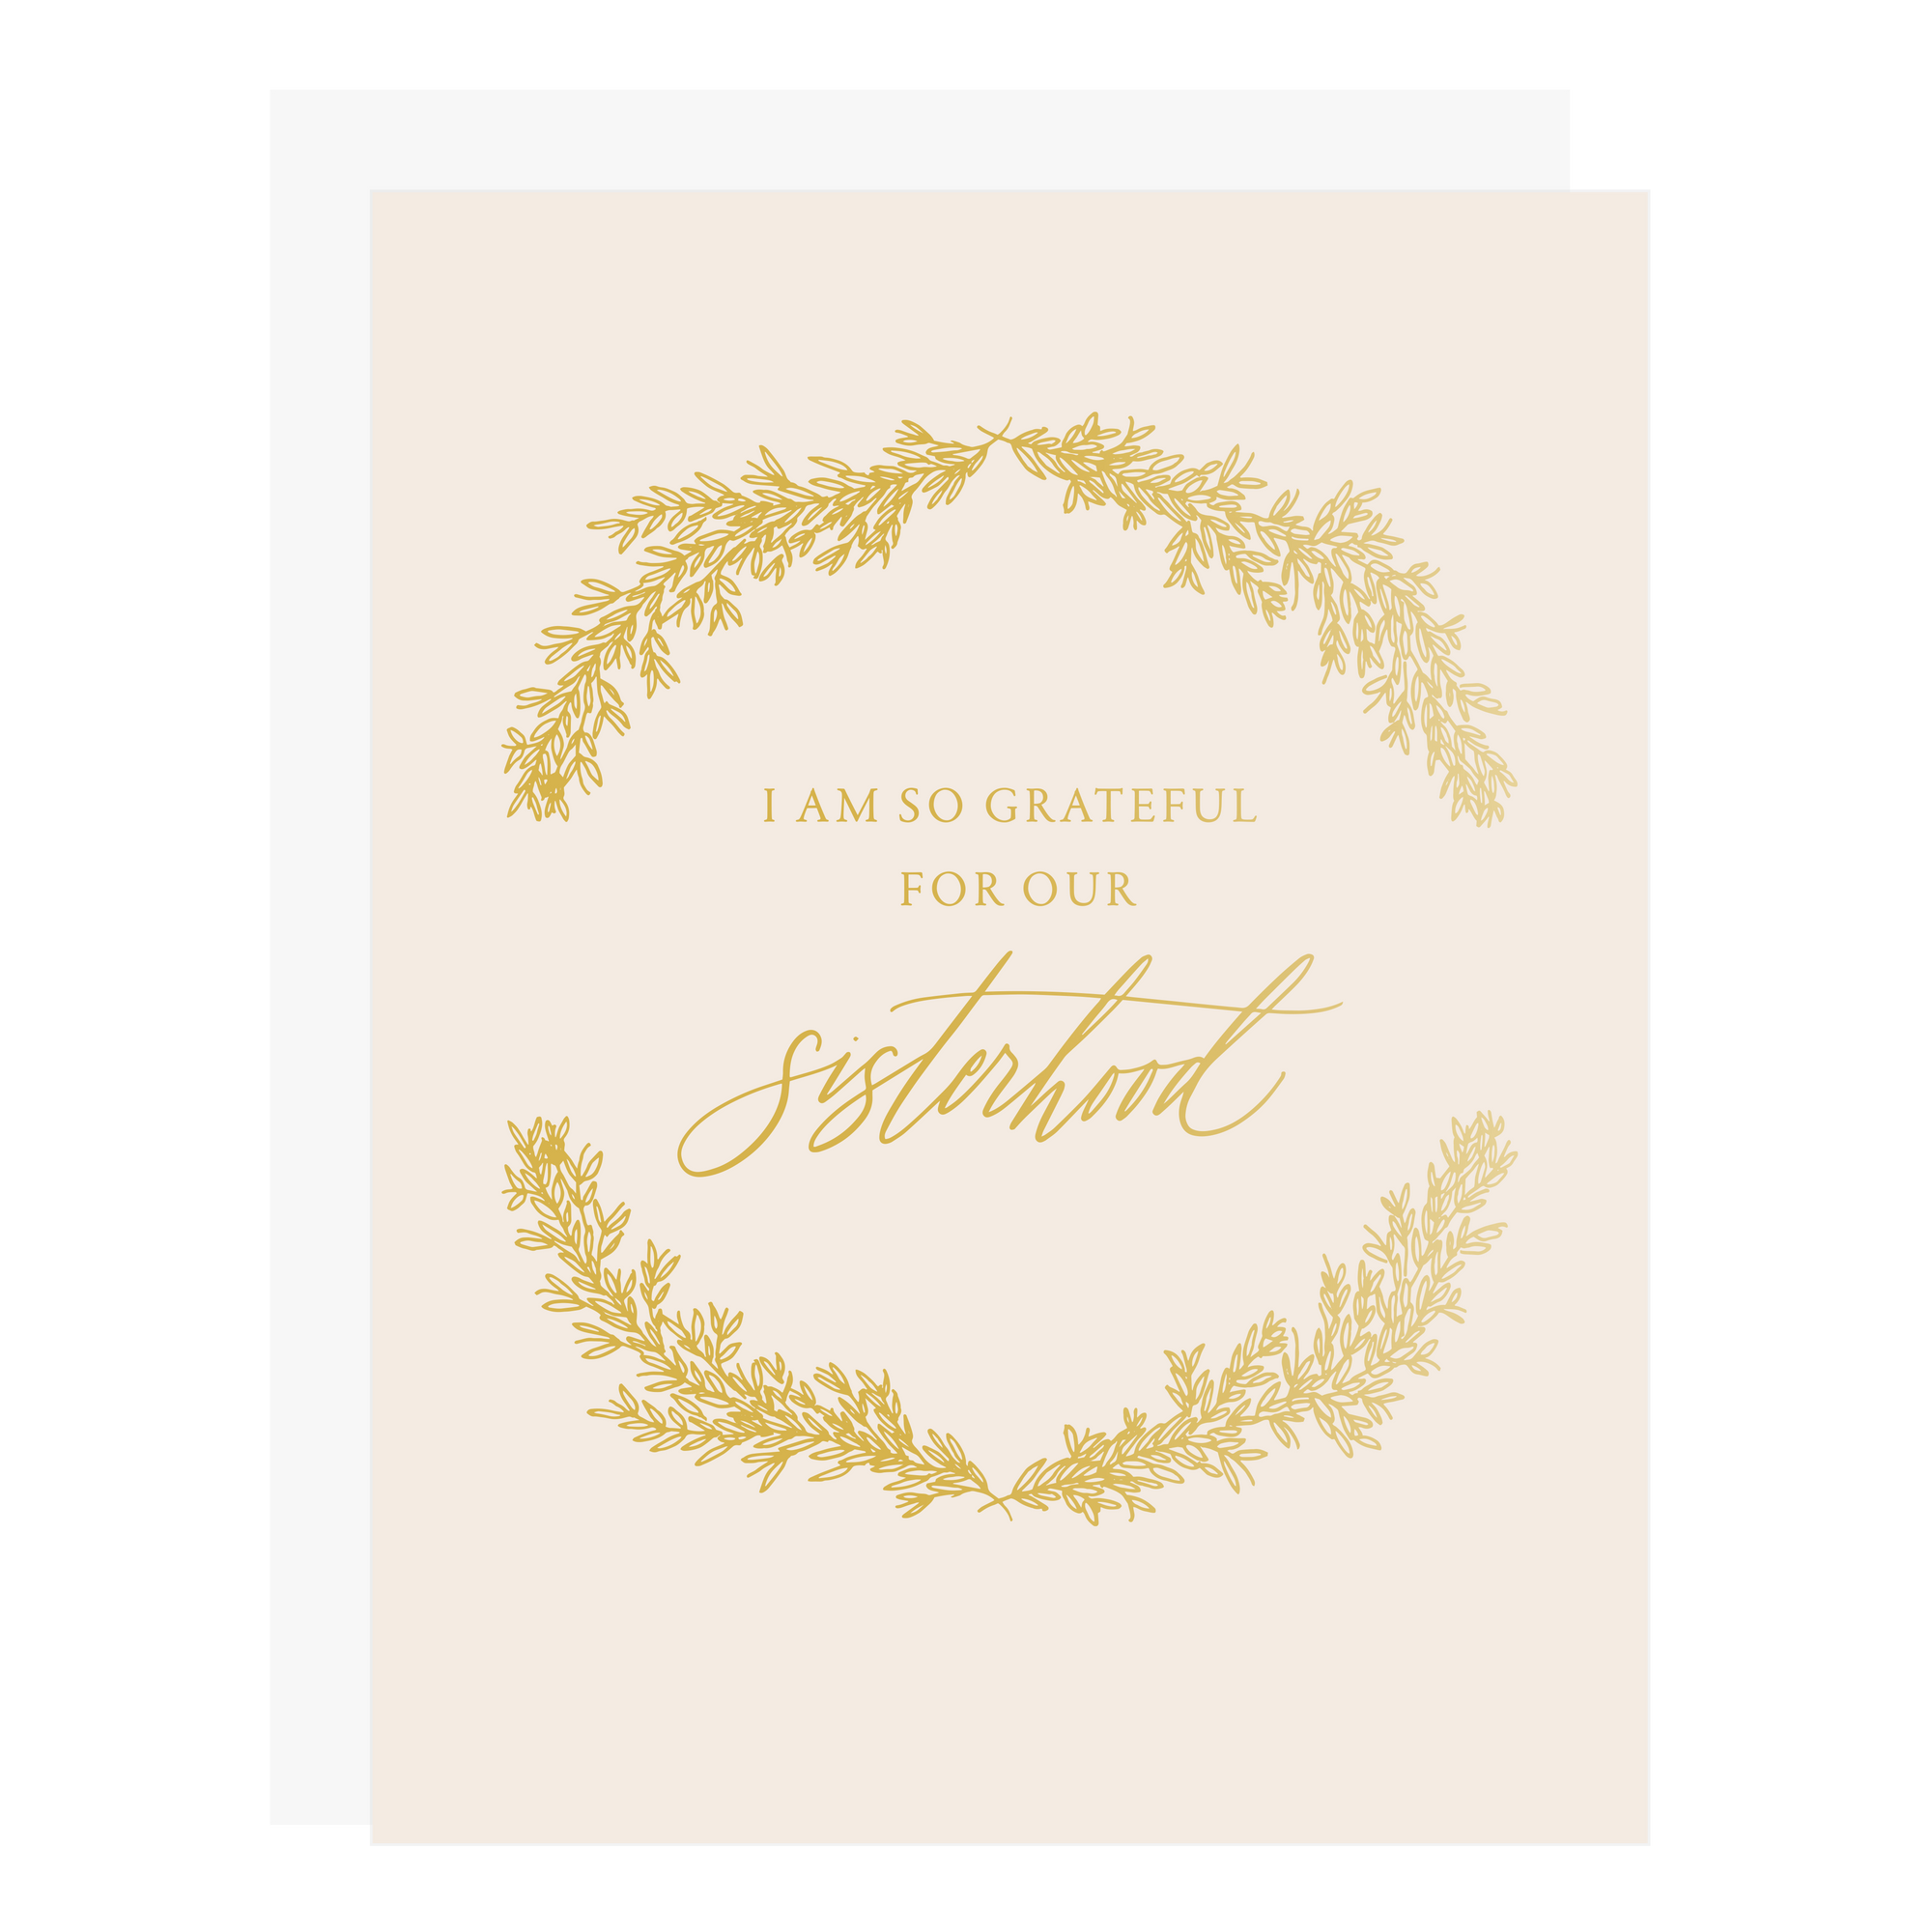 "Our Sisterhood" card, letterpress printed by hand in gold foil. 